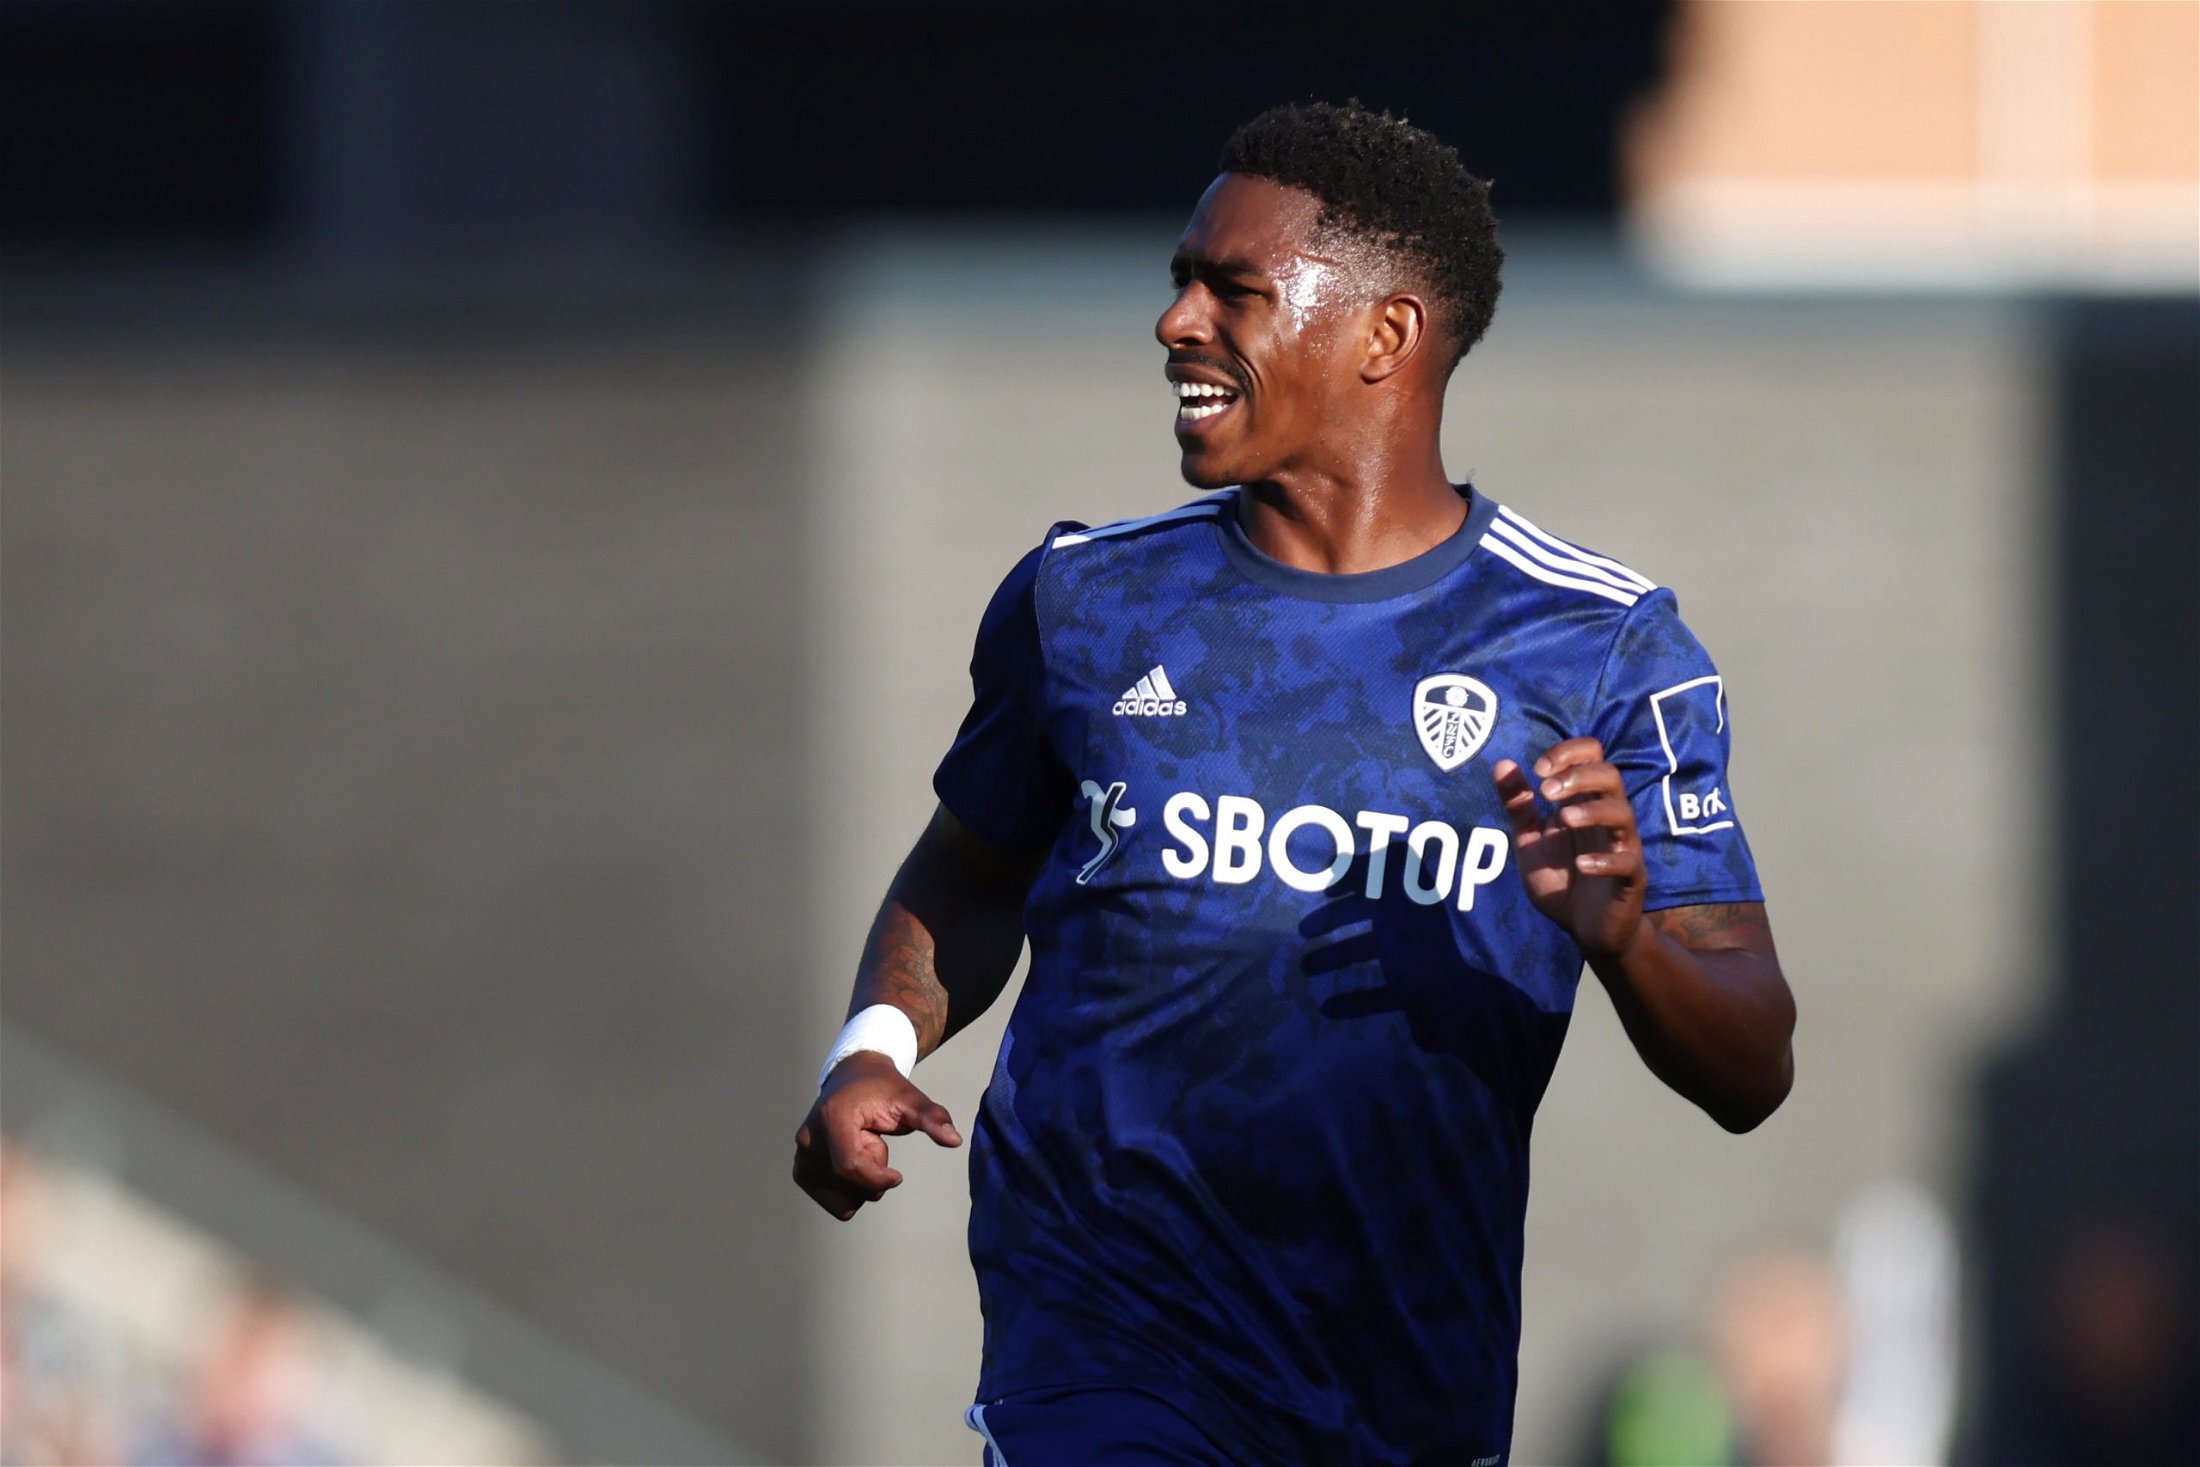 The Athletic reveal what potential Leeds United signing would mean for first-team player